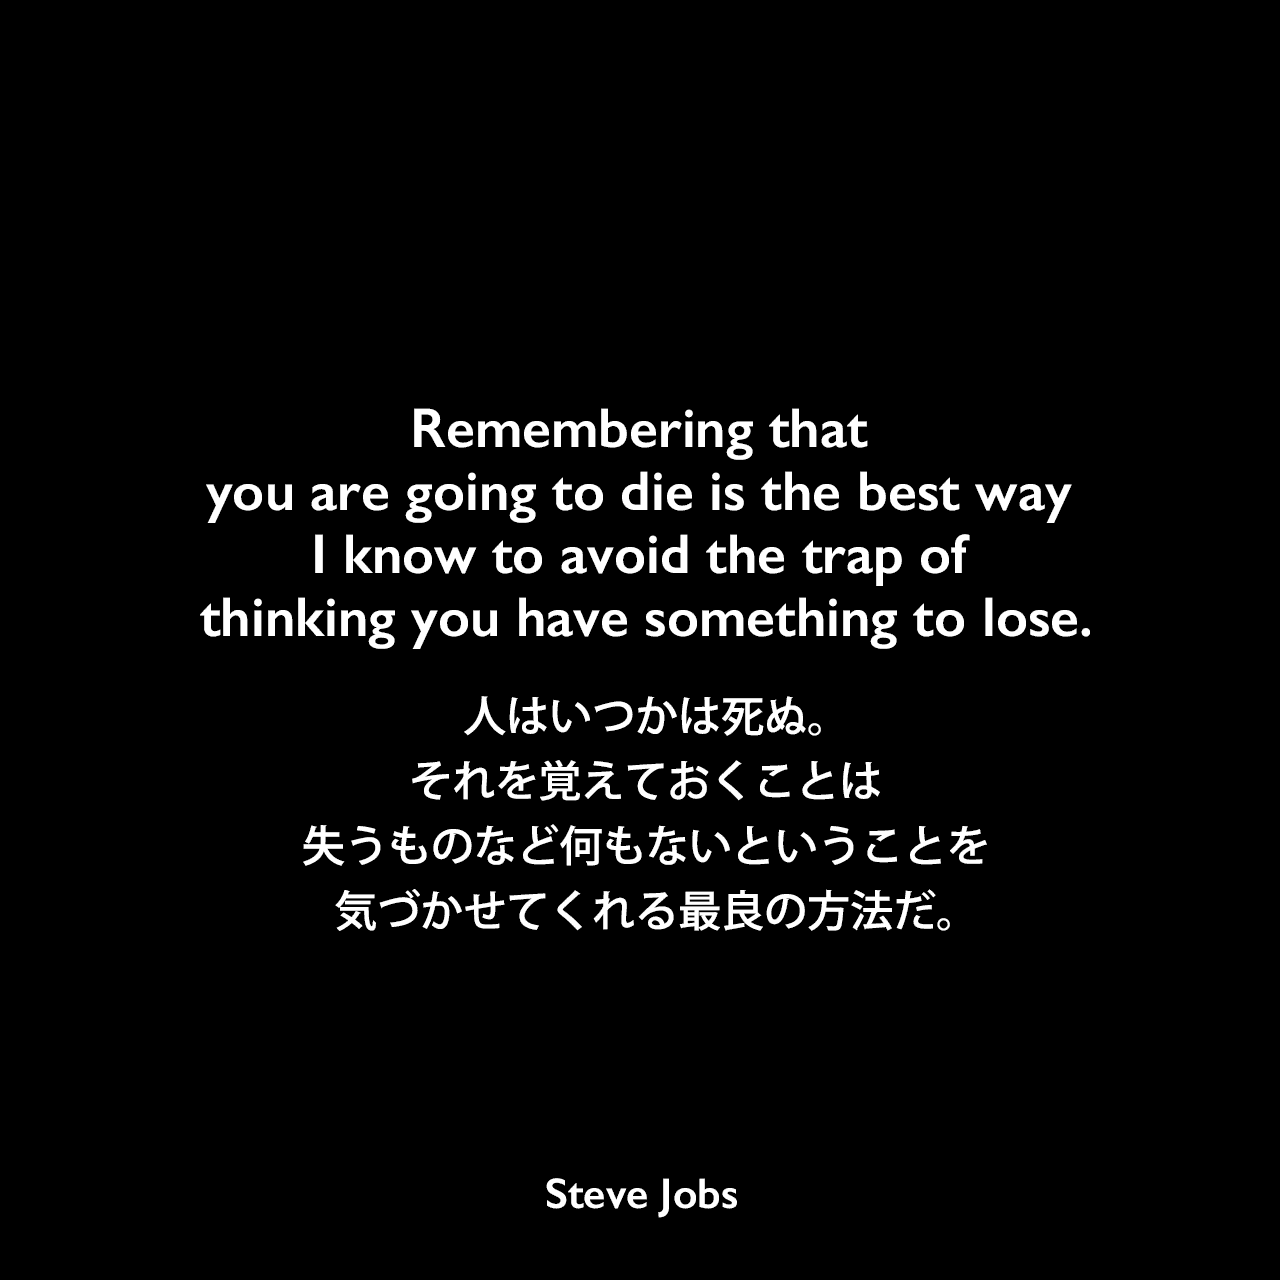 Remembering that you are going to die is the best way I know to avoid the trap of thinking you have something to lose.人はいつかは死ぬ。それを覚えておくことは、失うものなど何もないということを気づかせてくれる最良の方法だ。- 2005年6月12日 スタンフォード大学卒業式でのスピーチよりSteve Jobs